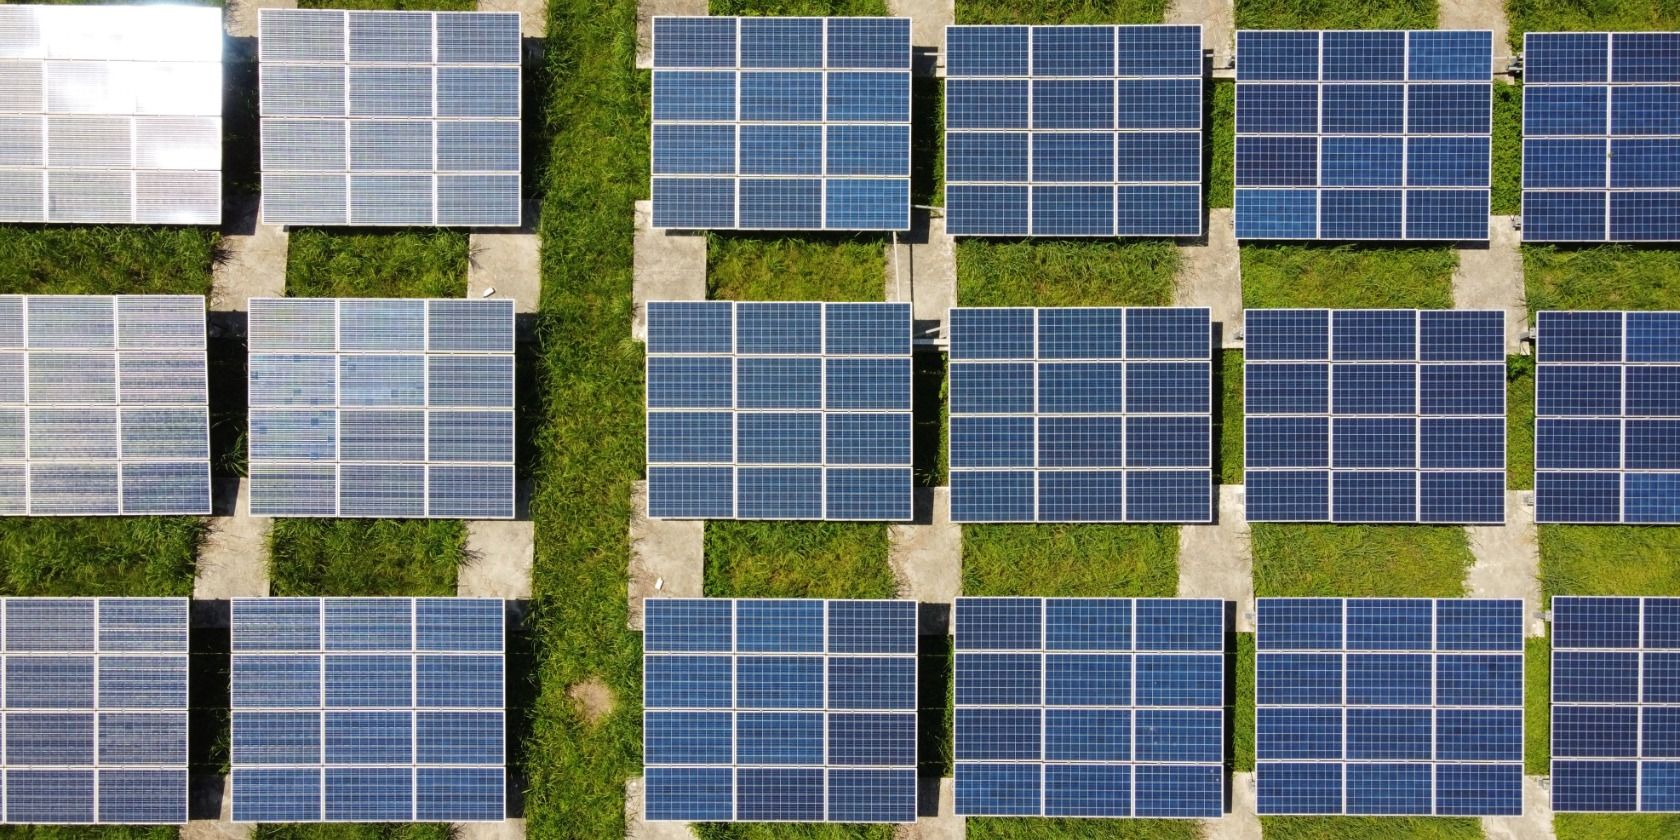 Three rows of solar panels, seen from a birds'-eye view.